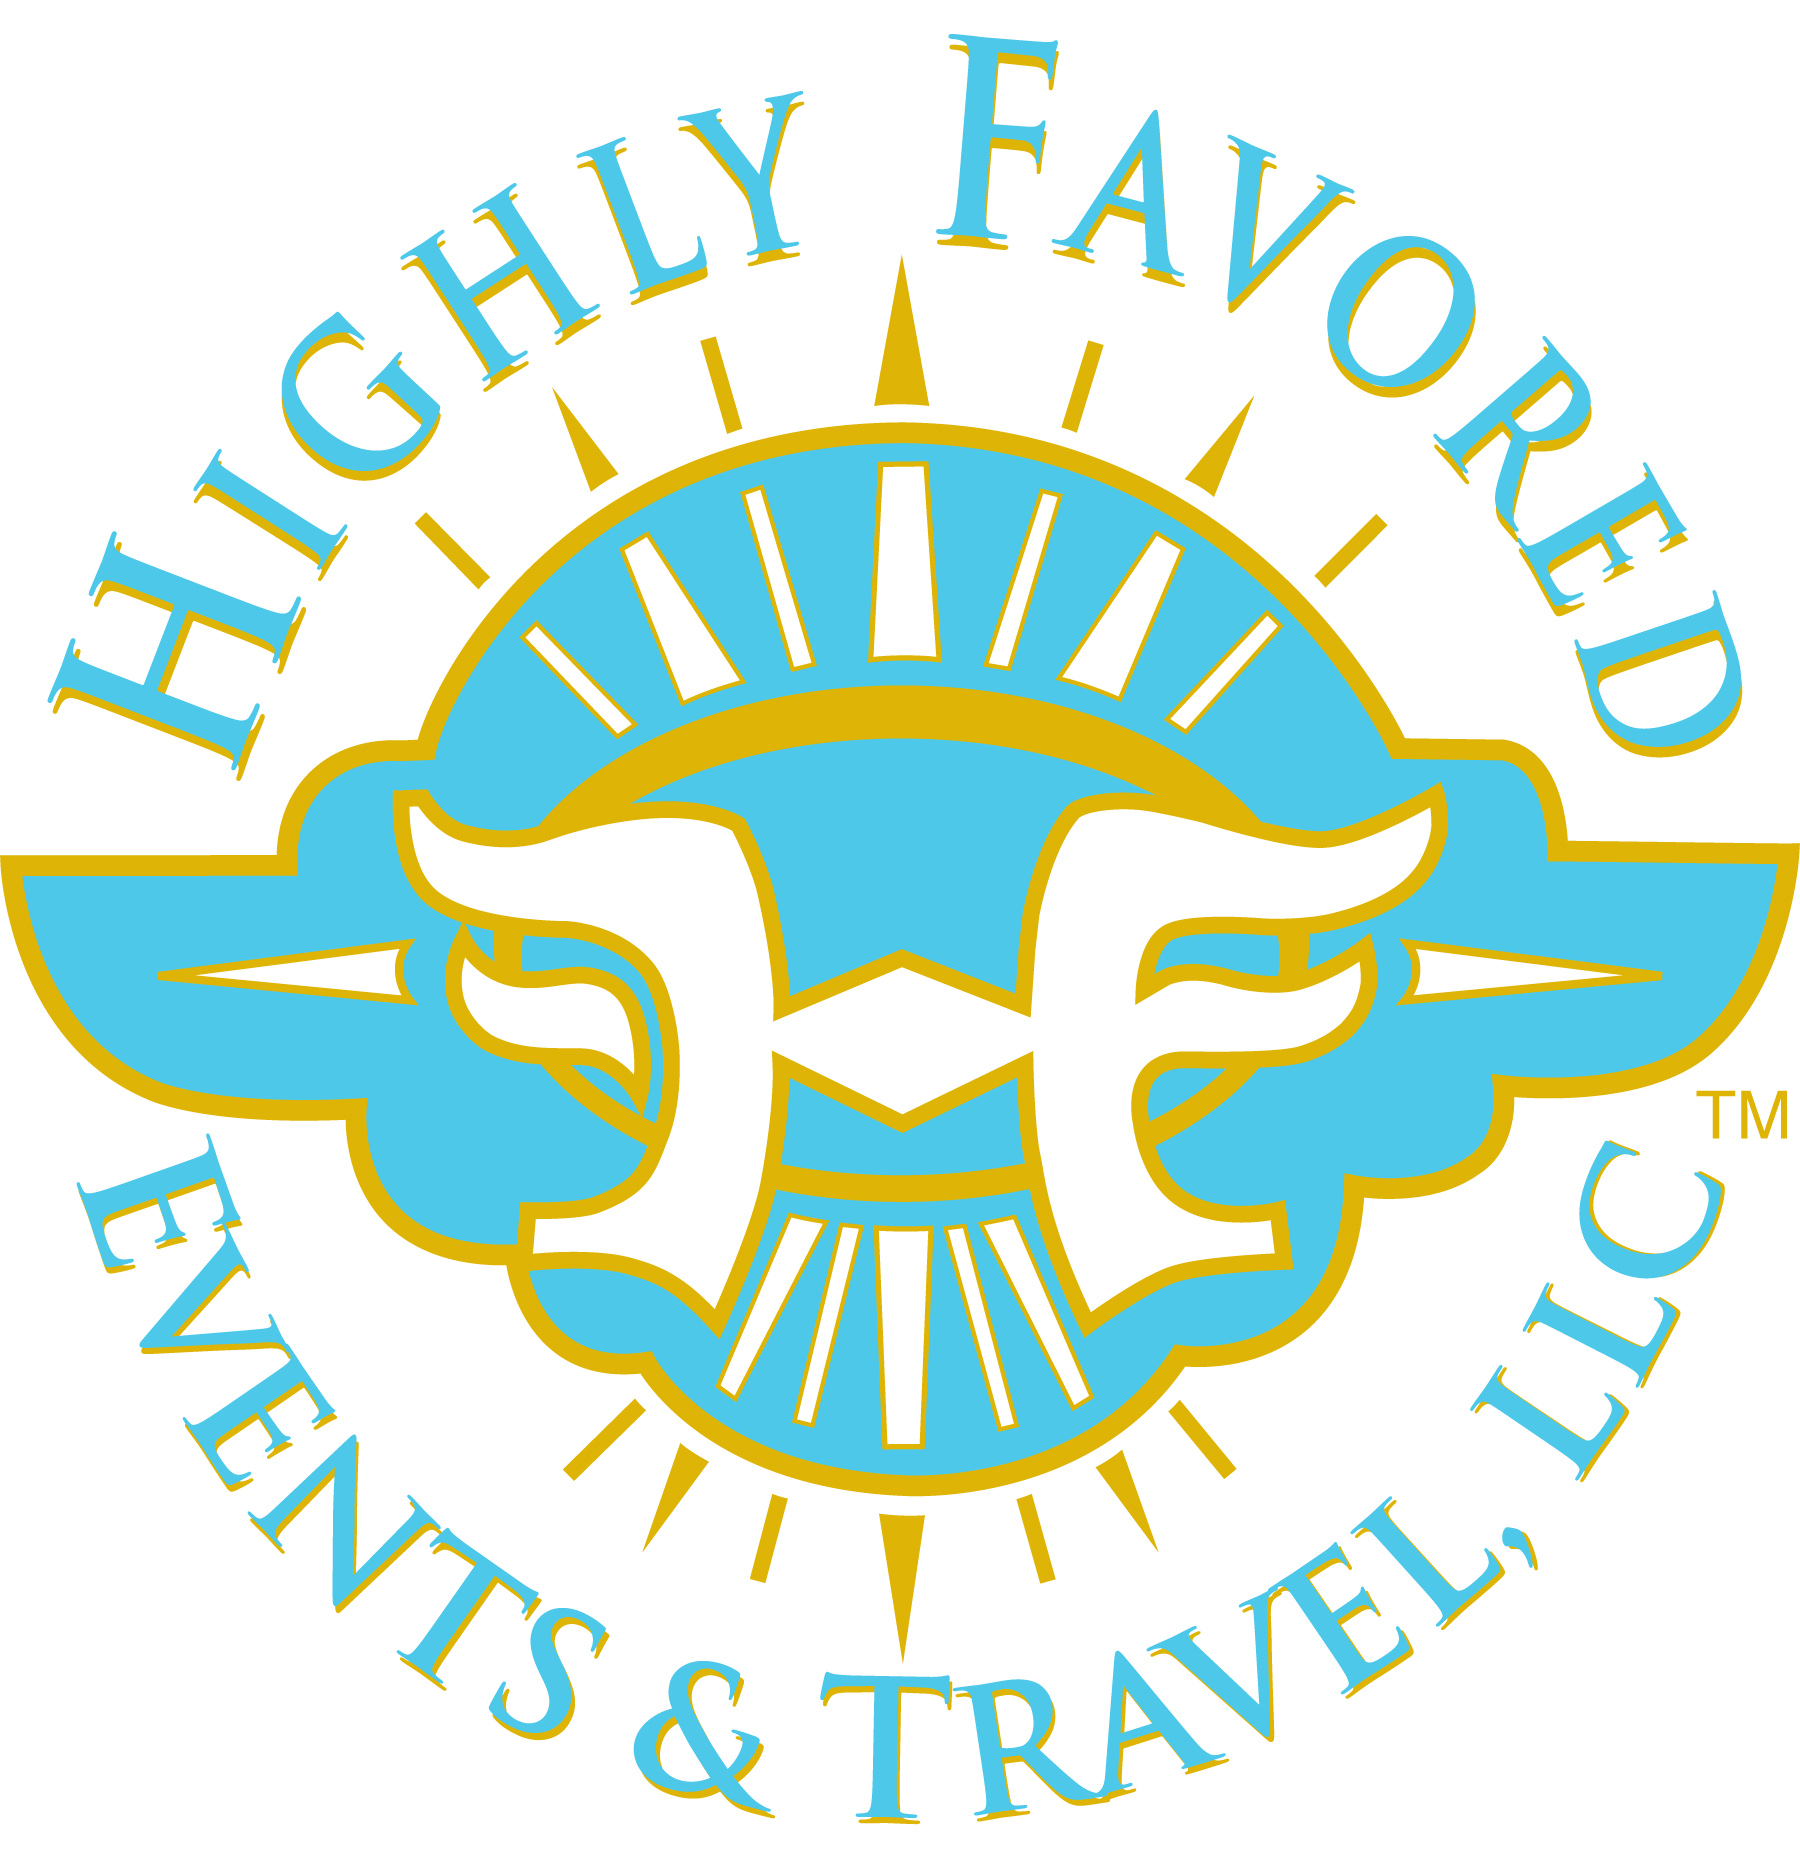 Highly Favored Events & Travel, LLC